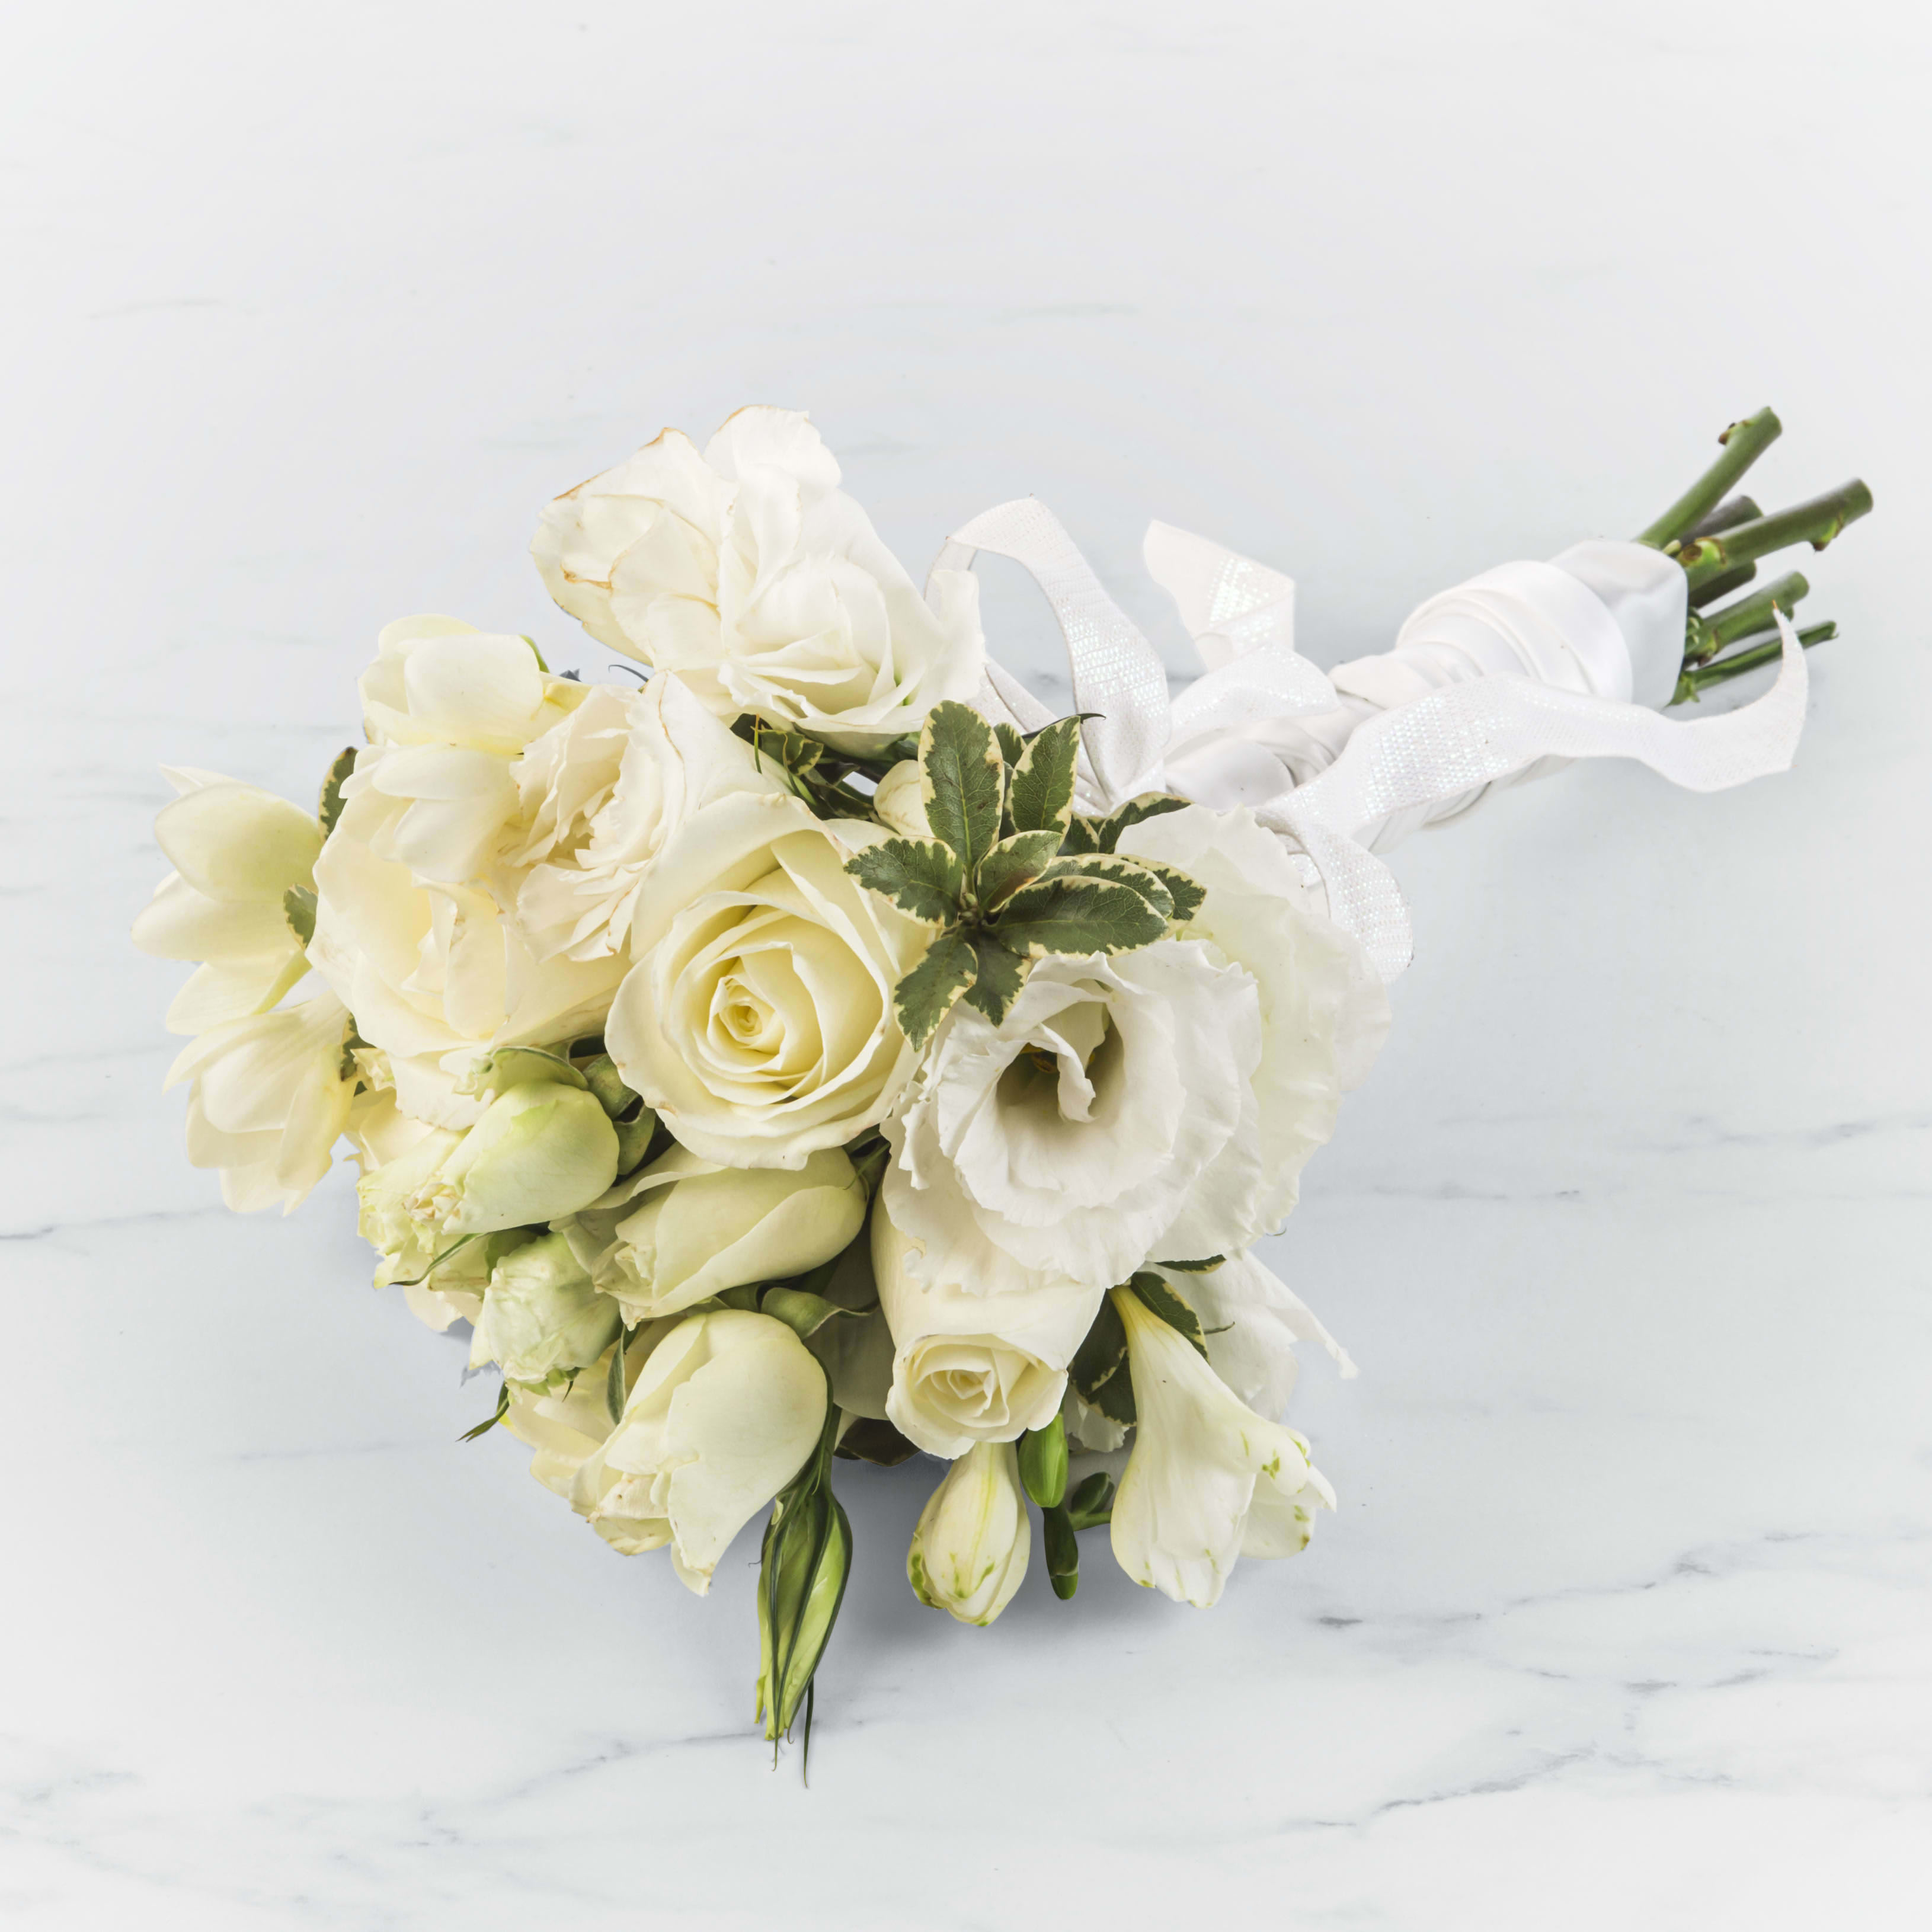 Prom, bridal, formal bouquet flowers